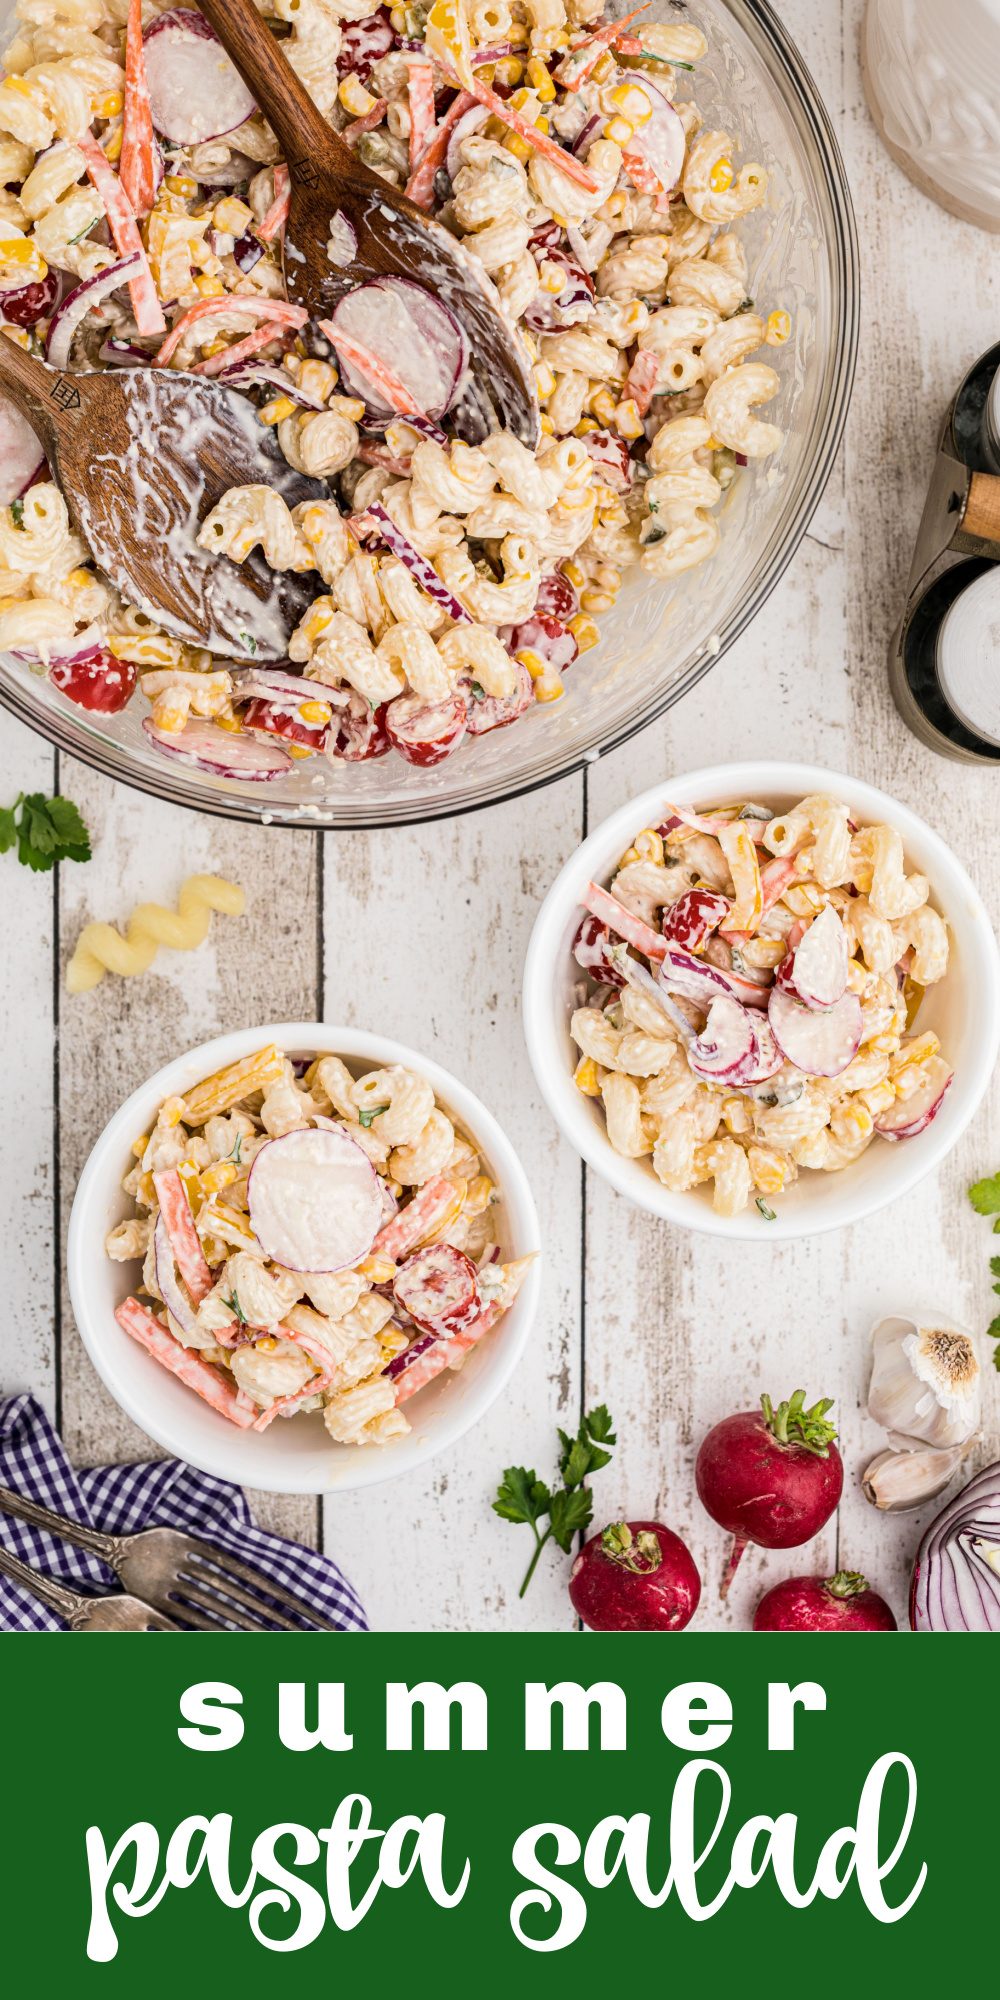 Give your tastebuds a truly refreshing flavor! This Summer Pasta Salad is perfect for summer gatherings and is a great addition to easy meals.